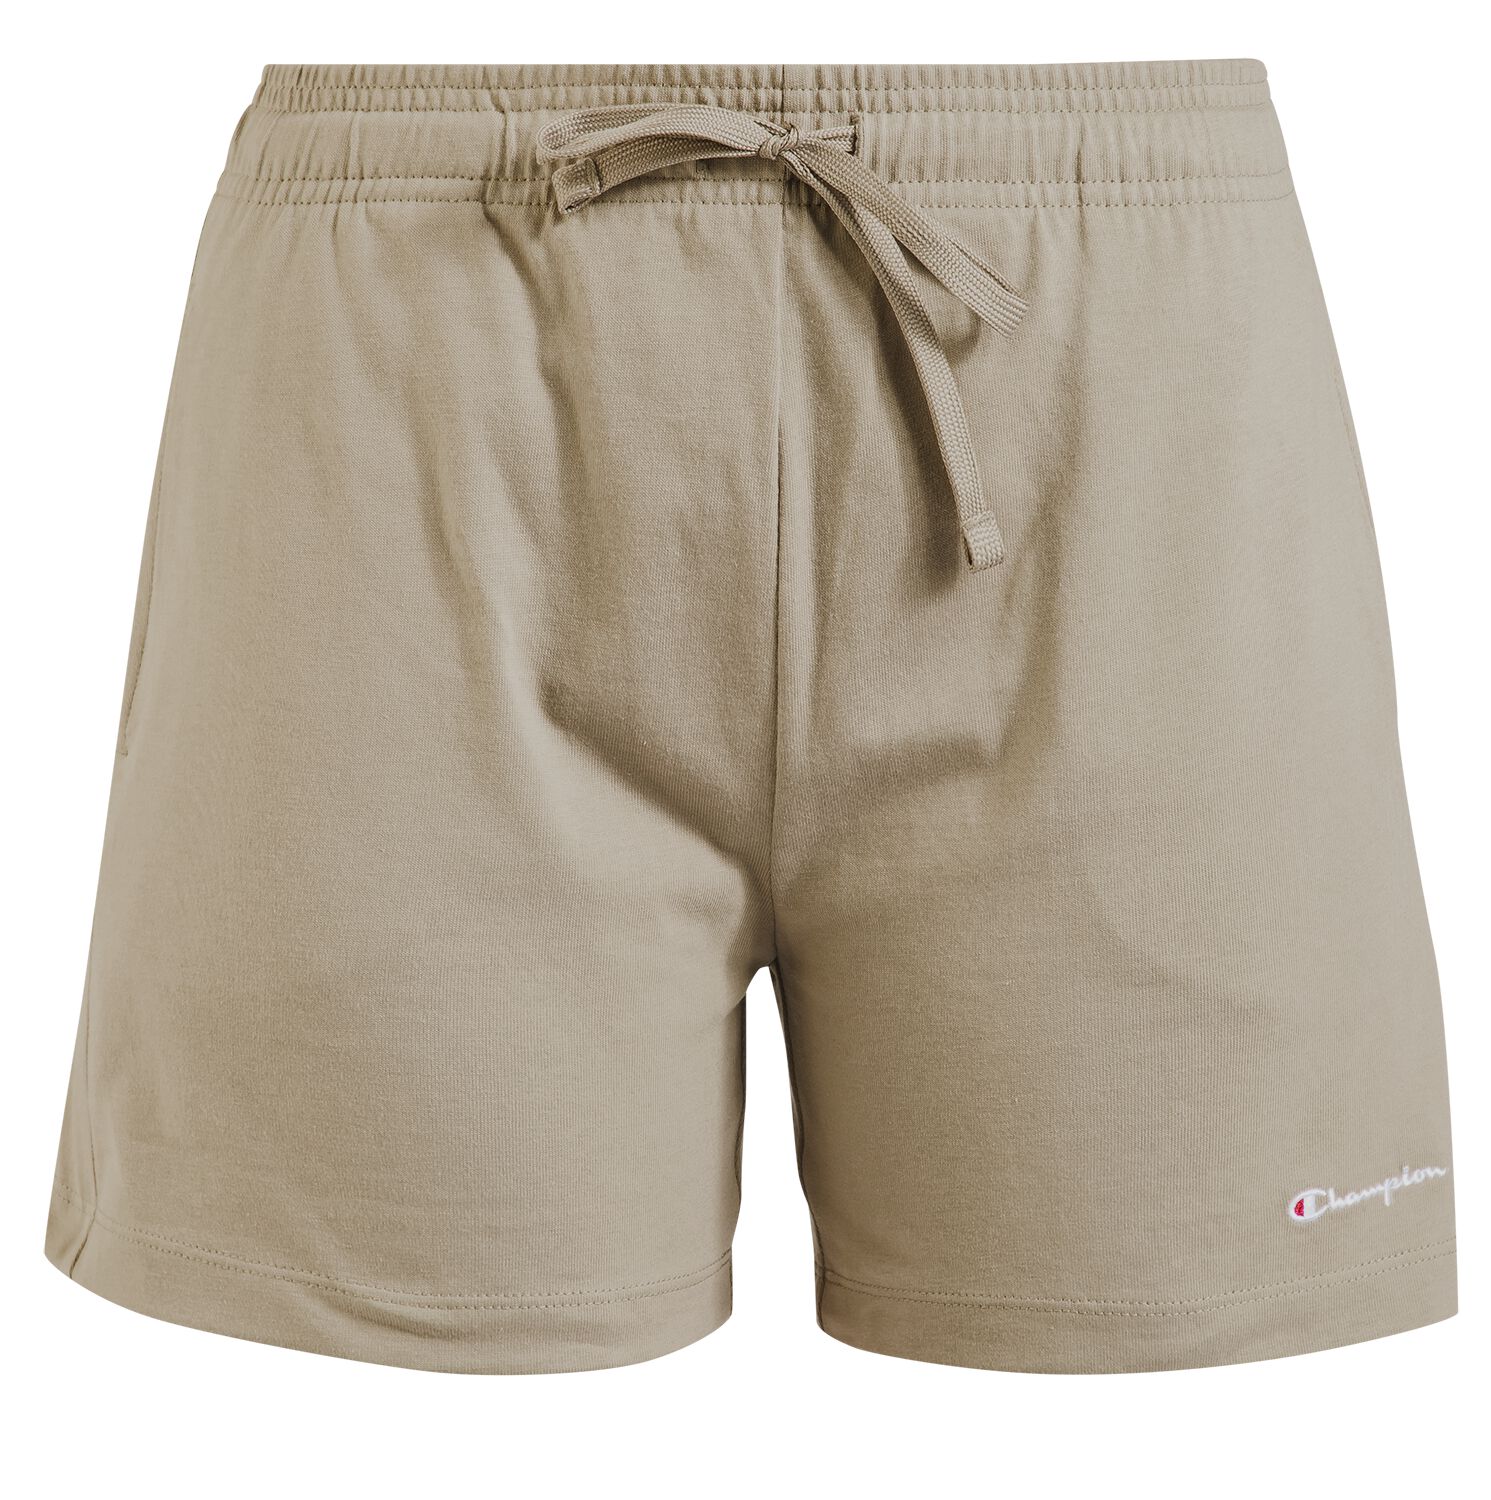 Image of Shorts di Champion - Icons Shorts - S a XL - Donna - marrone